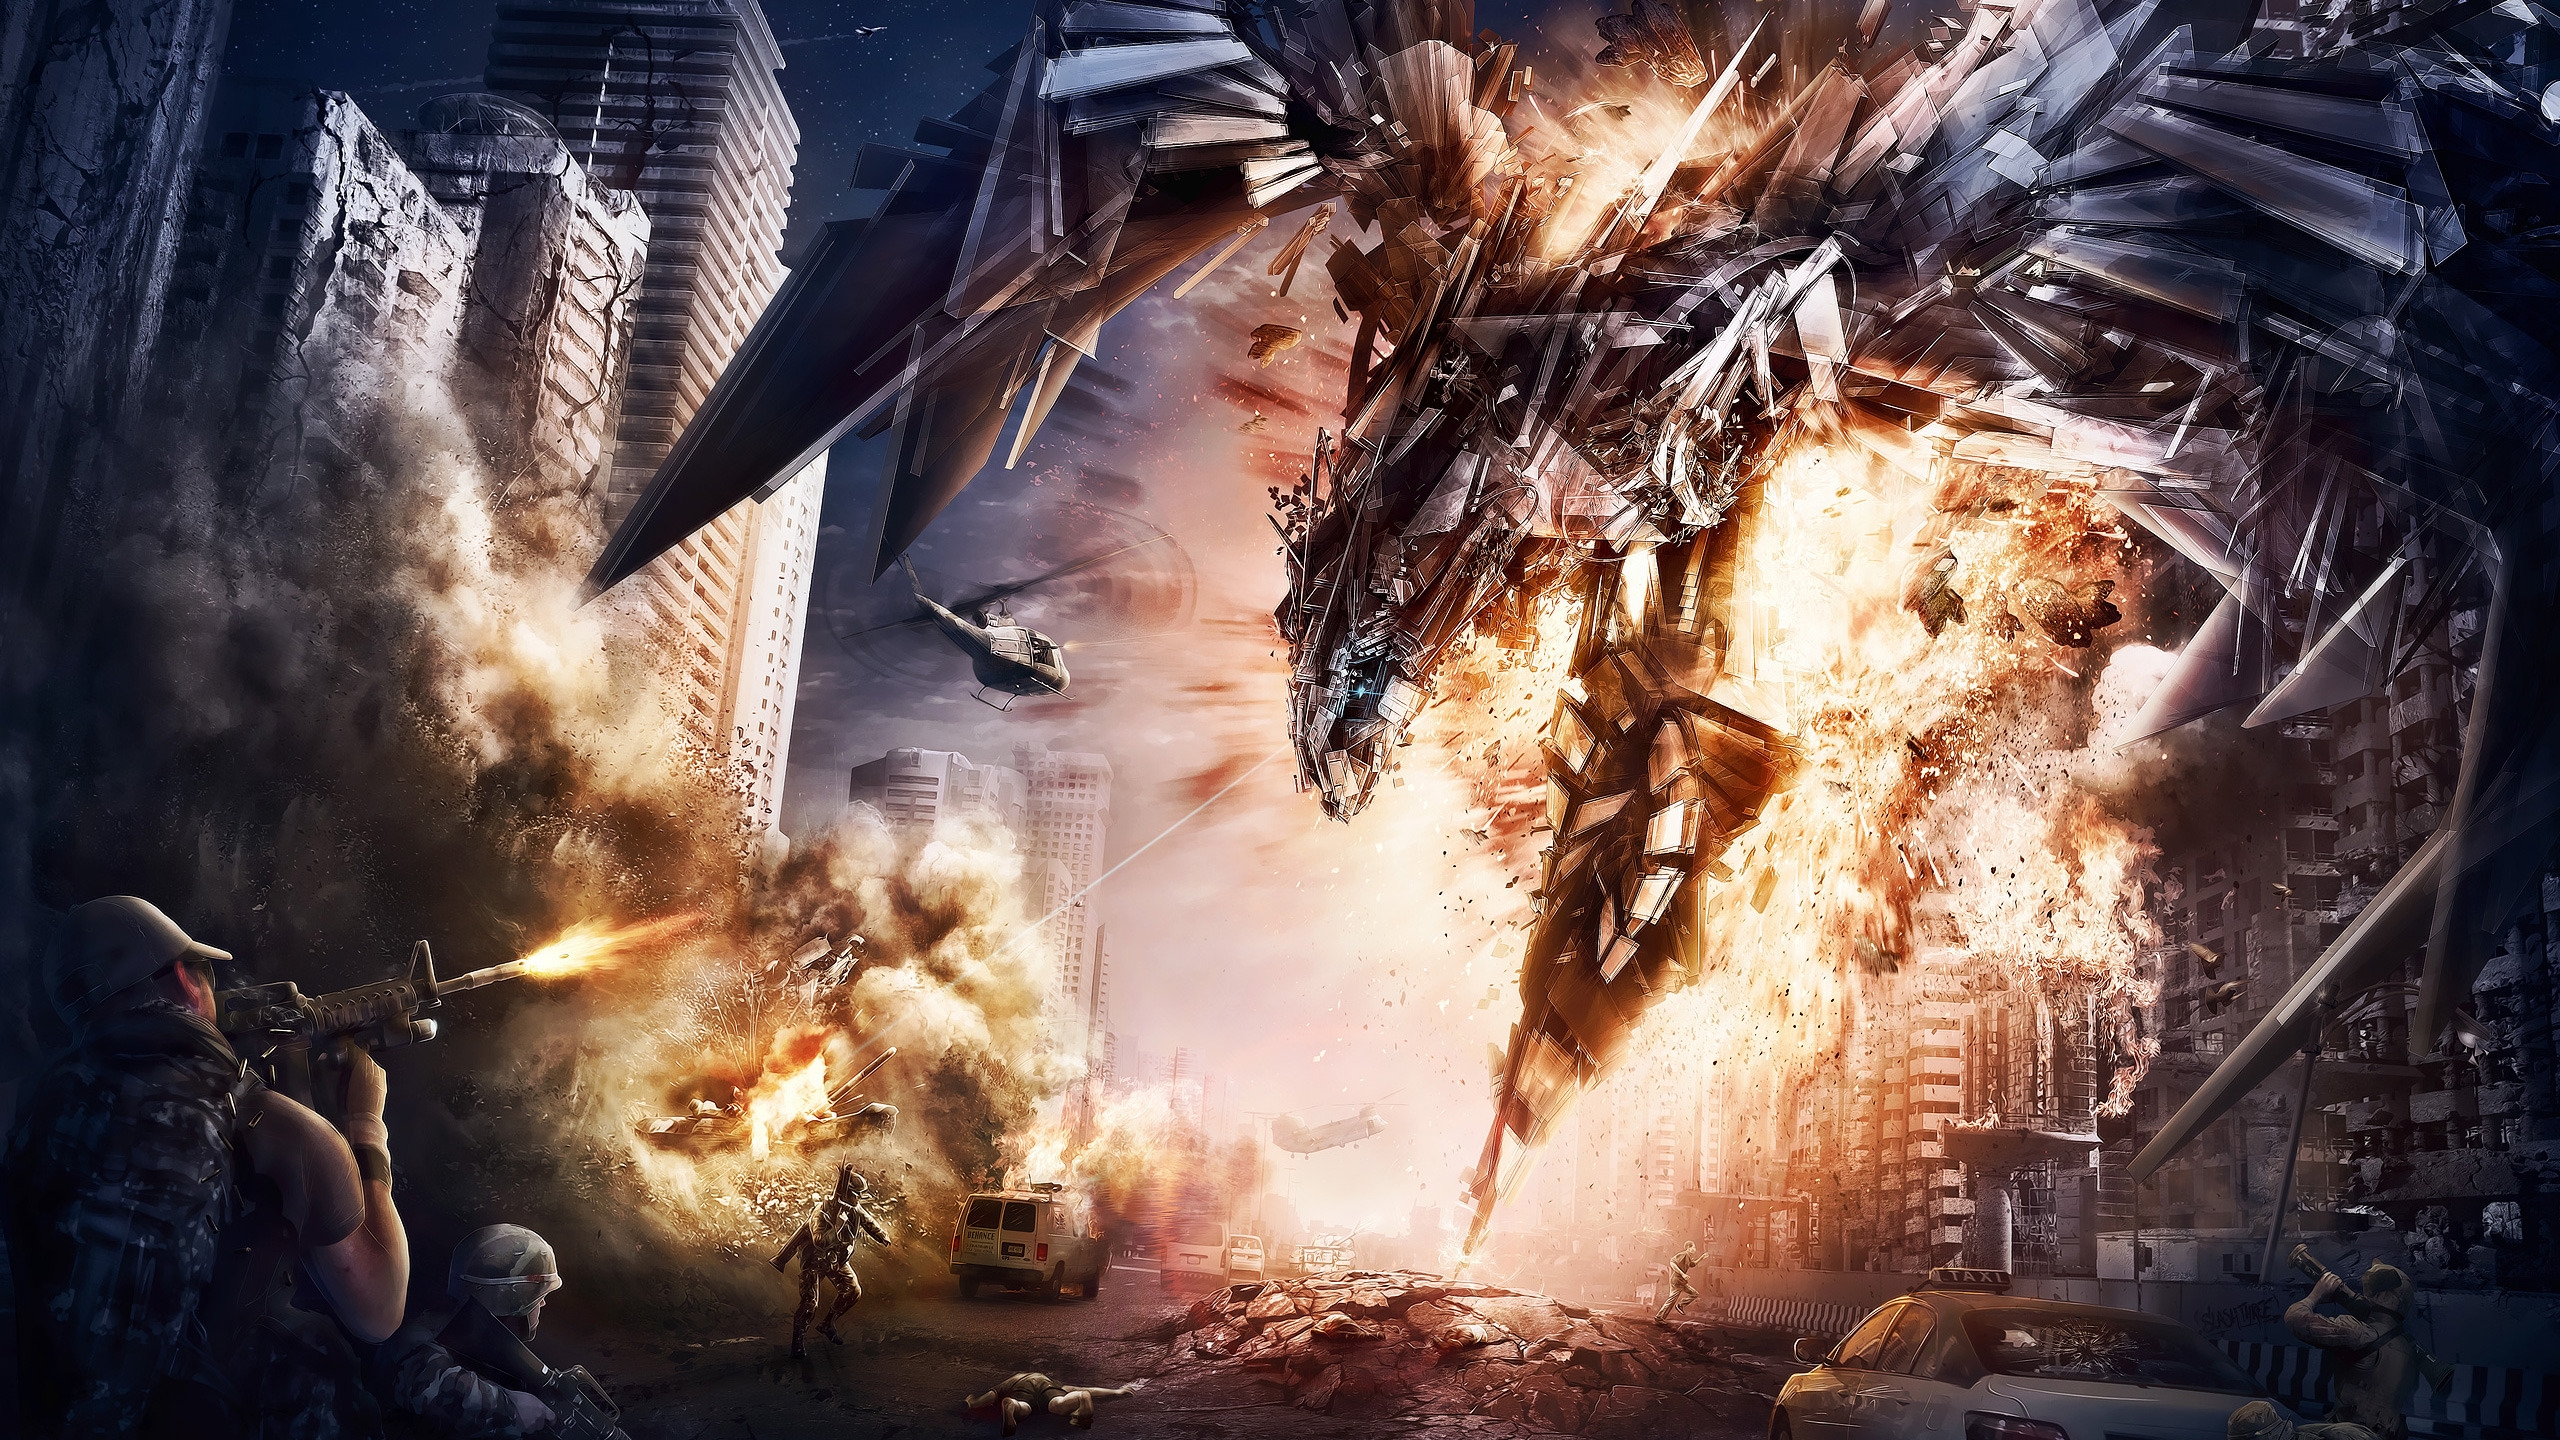 Transformers 4 Concept Art for 2560x1440 HDTV resolution